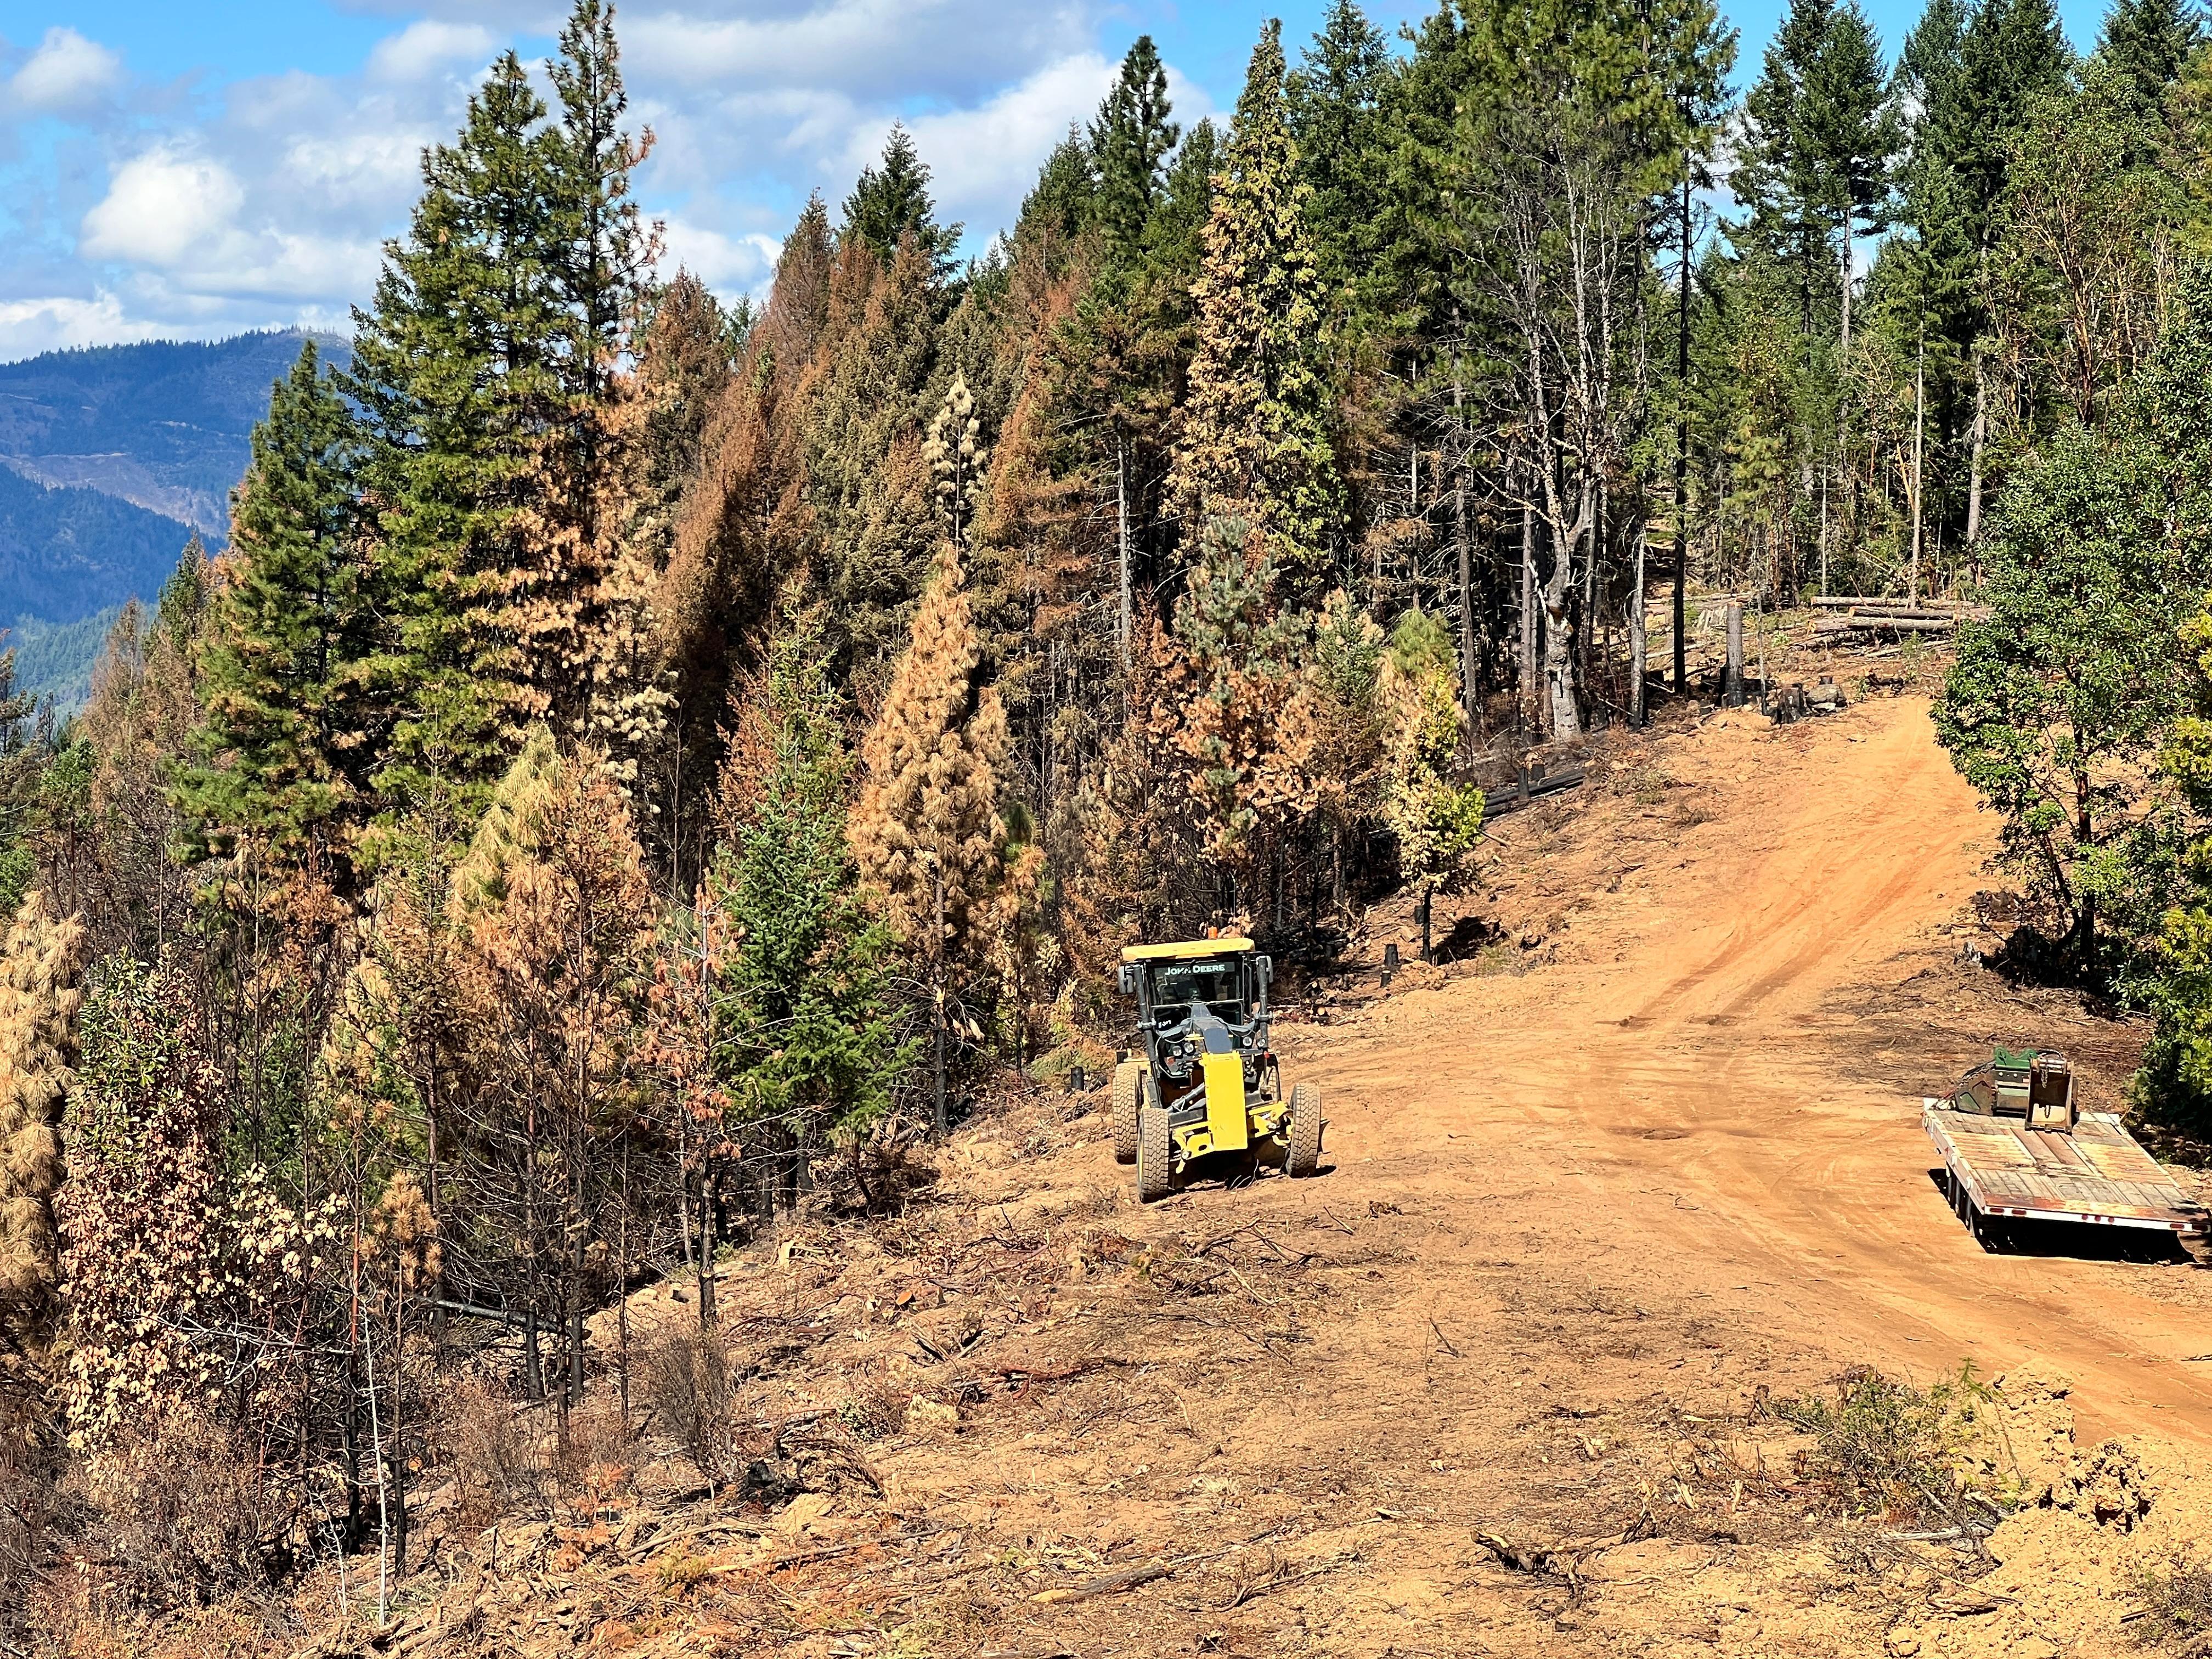 Incident Photo for the Rum Creek Fire